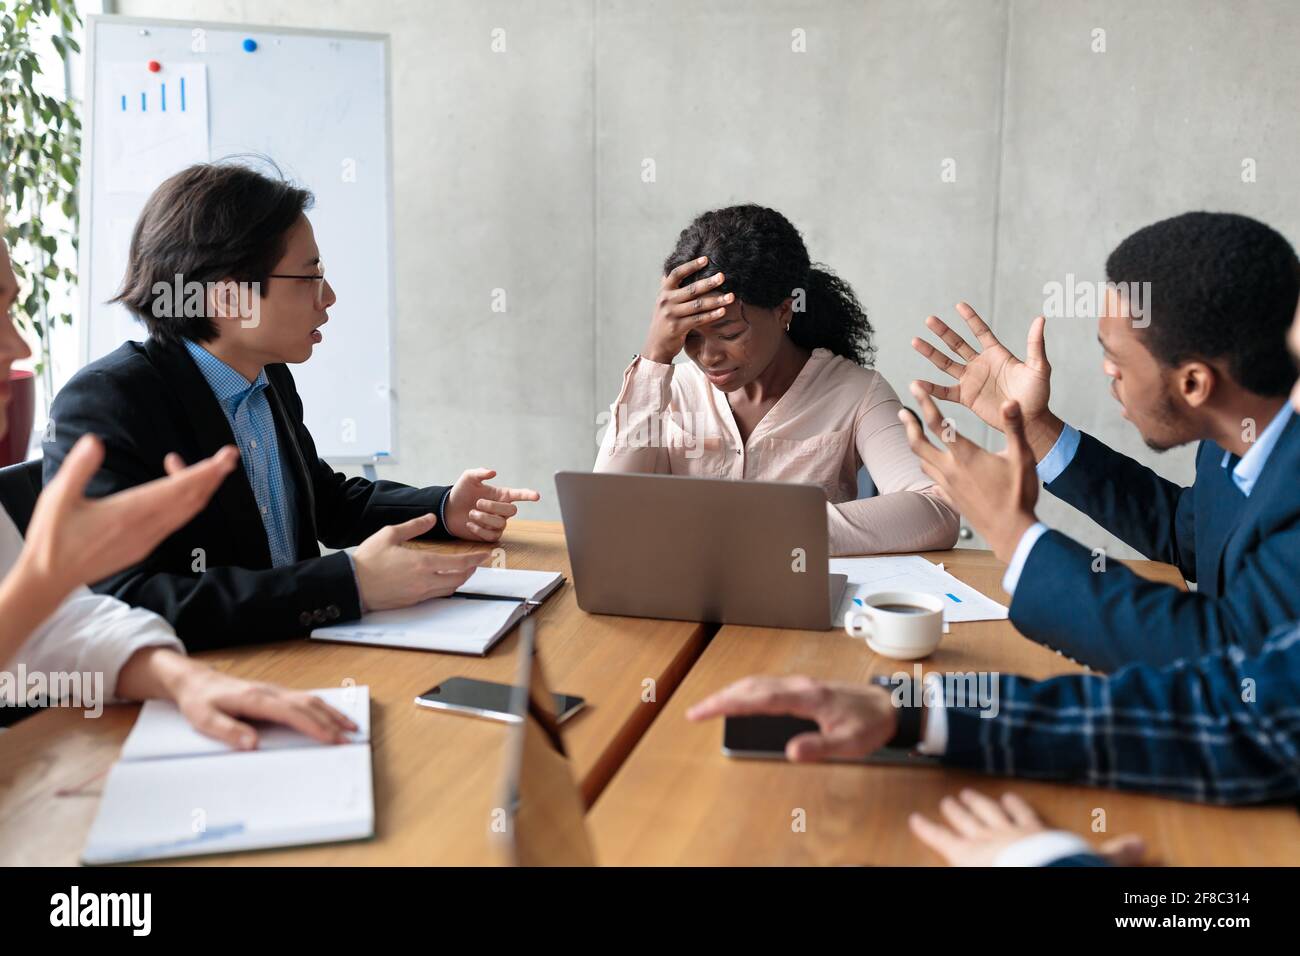 Aggressive Coworkers Shouting At Female Worker After Business Failure Indoors Stock Photo